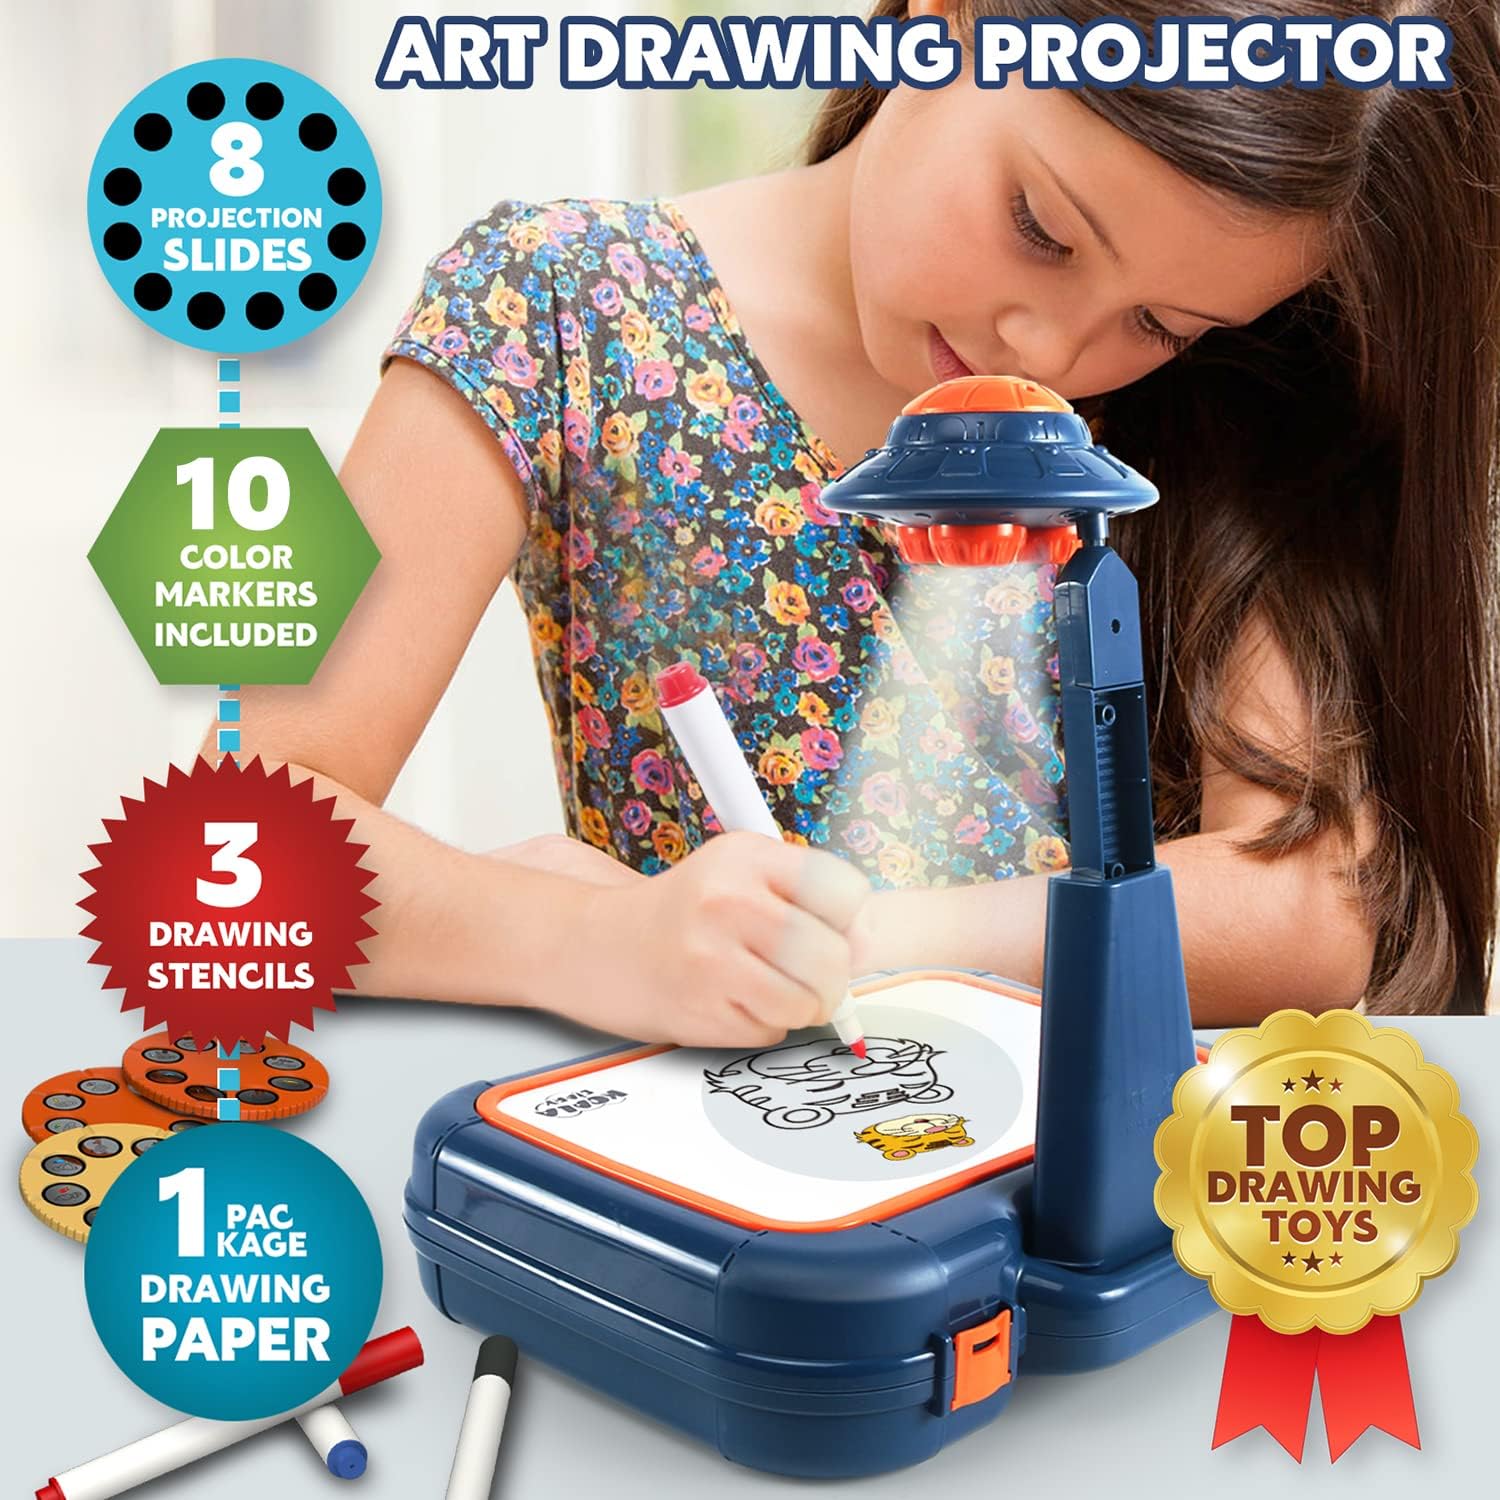 Drawing Projector, Art Sketch Projector for Tracing Include 64 Projection Images, Color Pens, Drawing Stencils